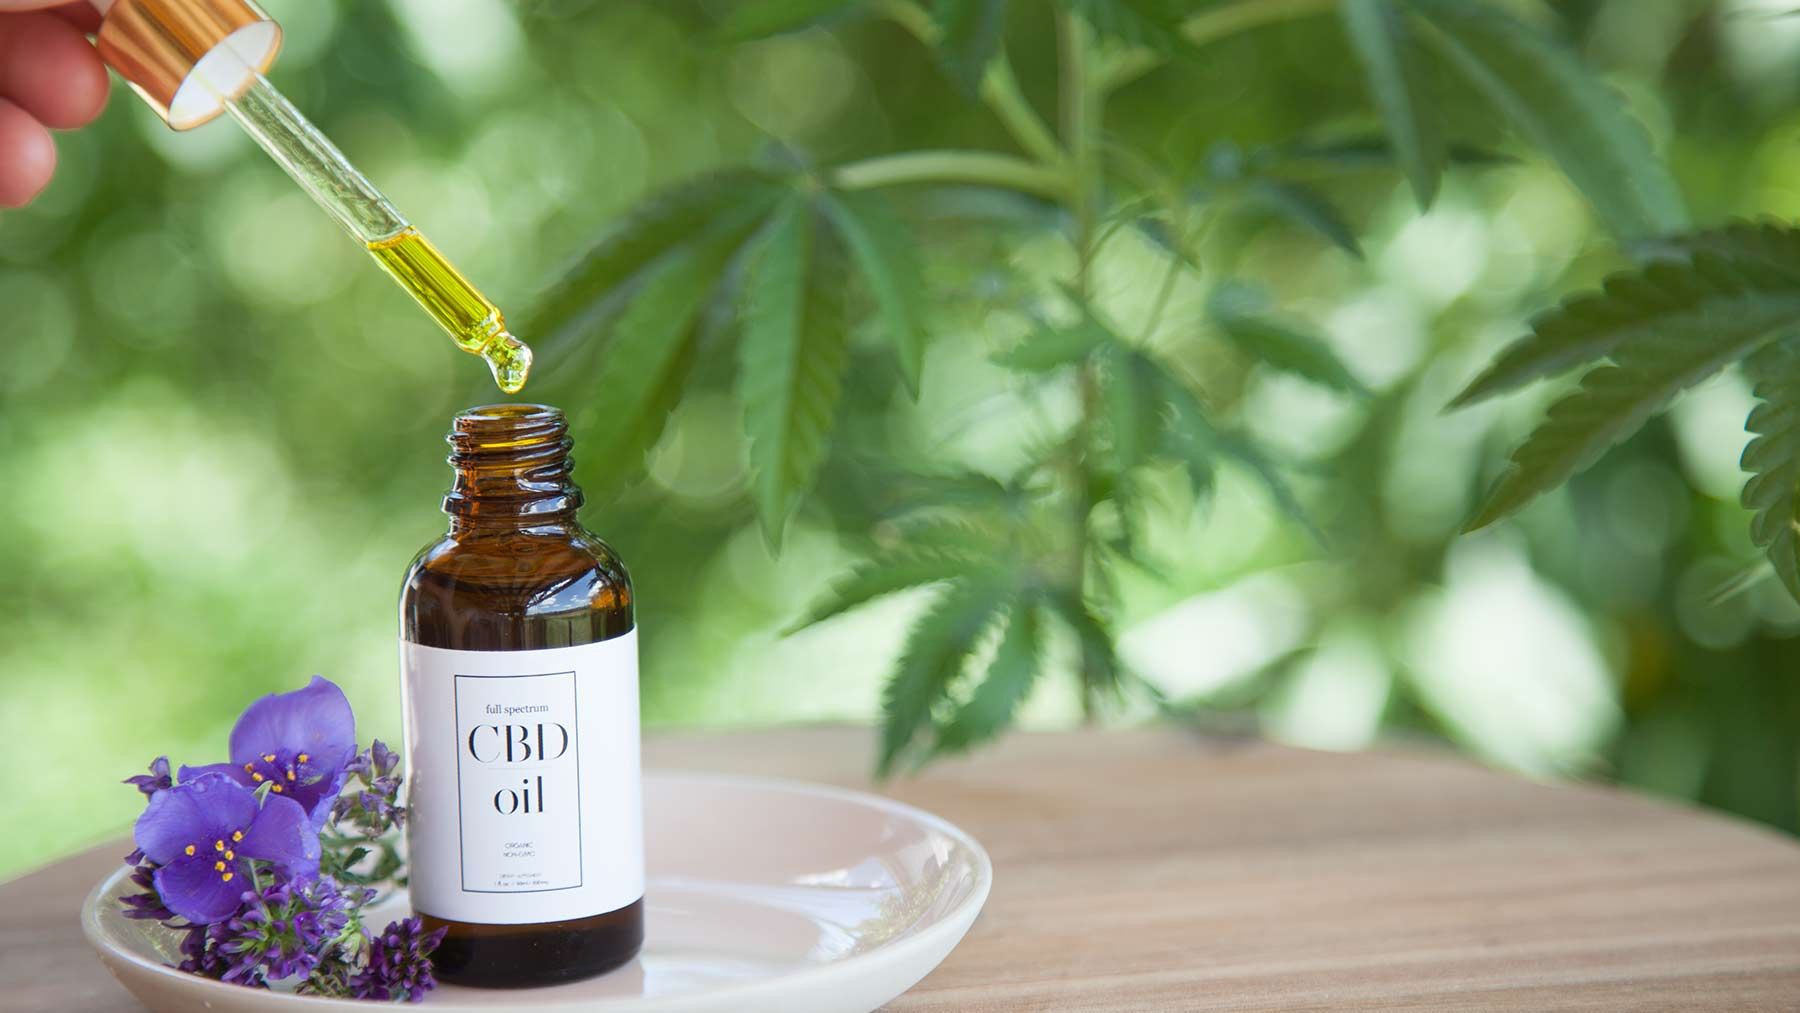 What to Expect this CBD Cyber Monday